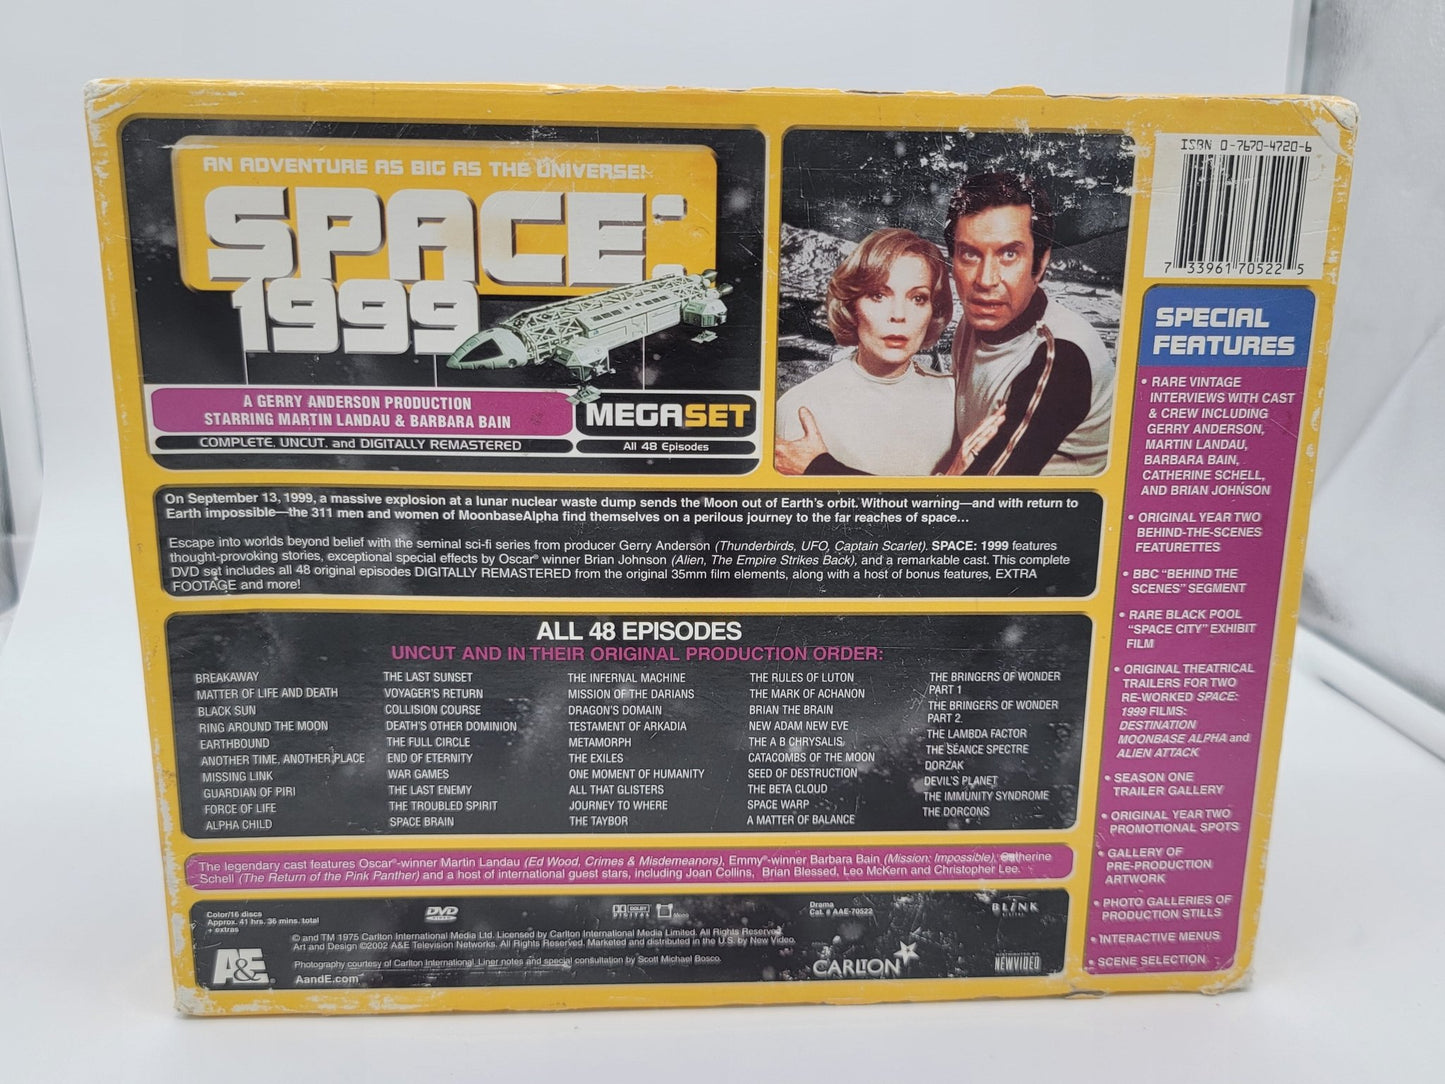 A&E - Space 1999 Mega Set all 48 Episodes | Complete Uncut & Digitally Remastered | DVD - DVD - Steady Bunny Shop